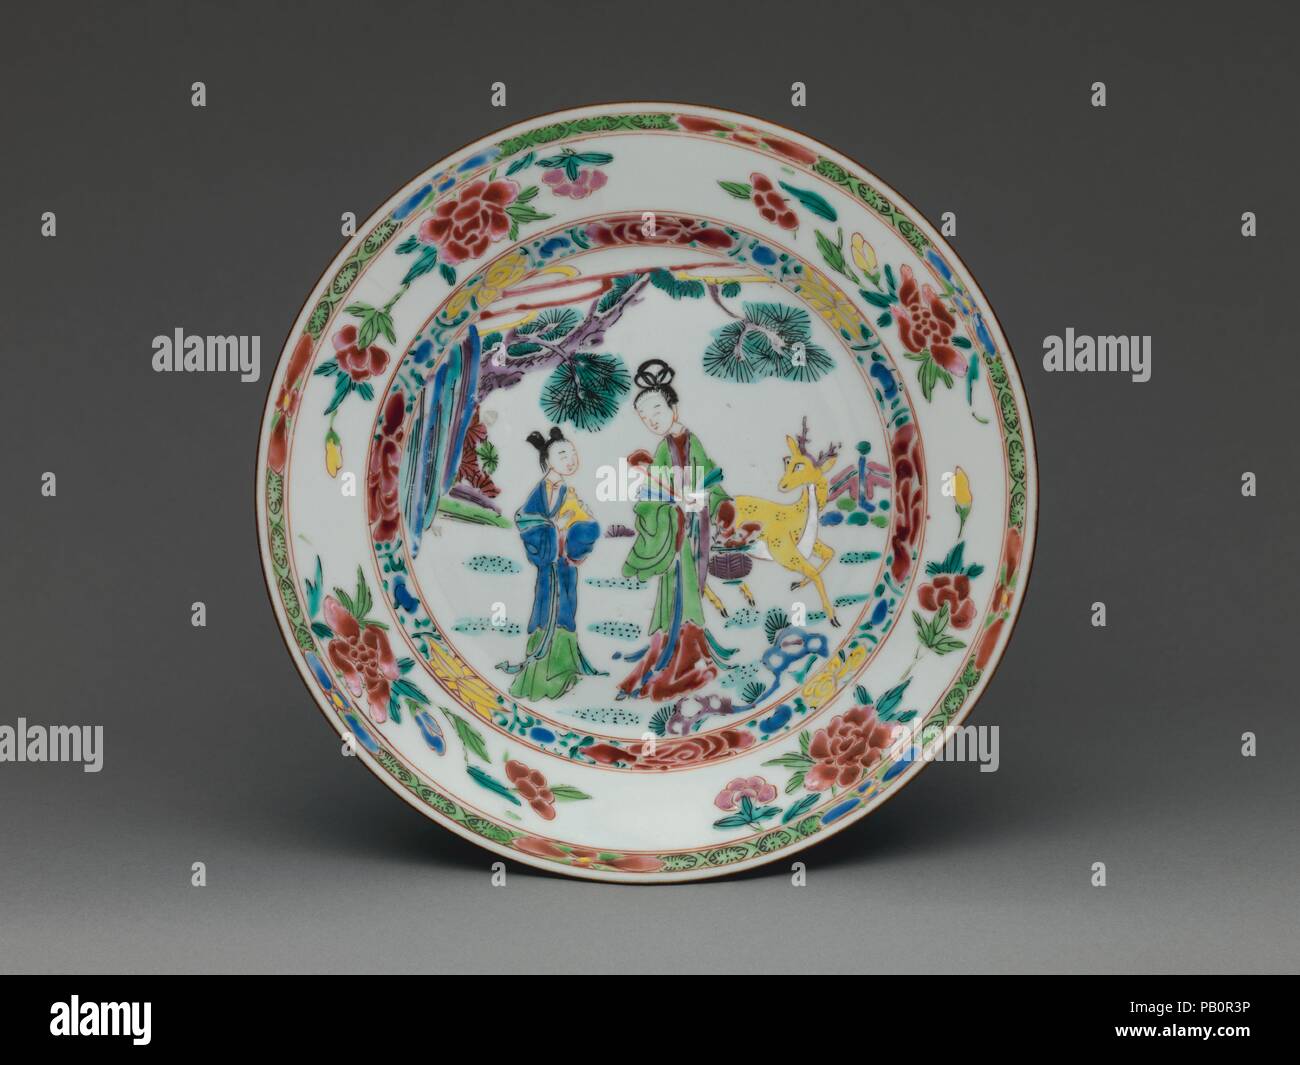 Plate. Culture: Chinese, for British market. Dimensions: Overall (confirmed): 1 × 9 × 9 in. (2.5 × 22.9 × 22.9 cm). Date: ca. 1723-35.  A Chinese plate painted with this exact composition must have served as a model for the painters at the Bow factory in England, for a Bow plate in the Museum's collection (2014.600) is decorated with precisely the same composition executed in a very similar palette. Surprisingly, one is able to match a piece of British or European porcelain with a Chinese prototype relatively rarely, and it is even more unusual to find an original model that has been copied wi Stock Photo